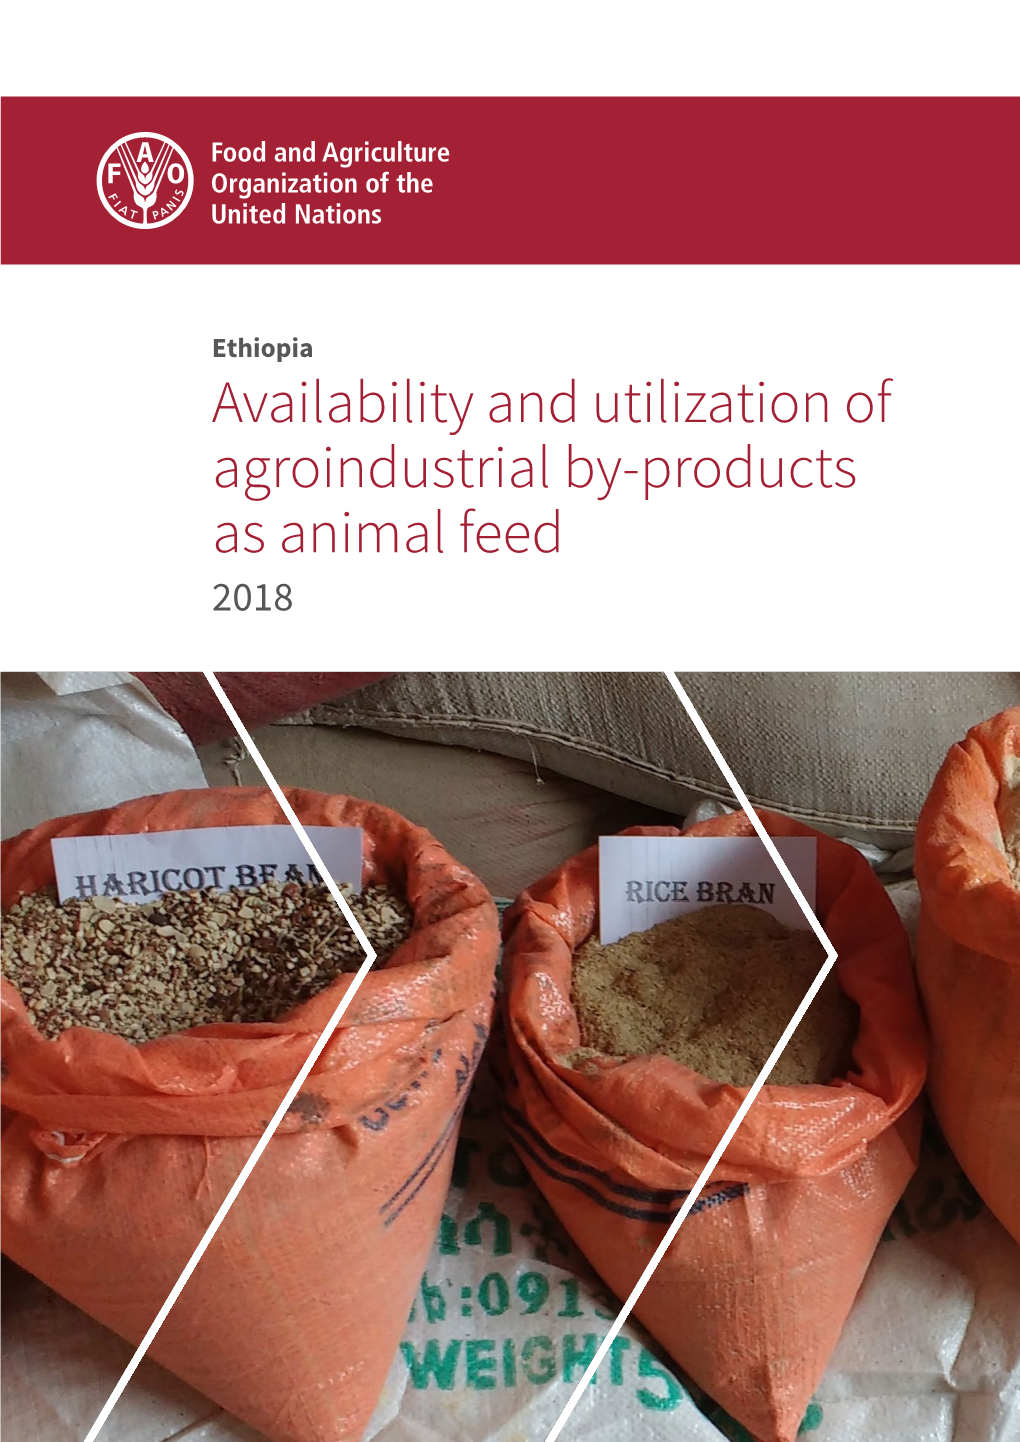 Availability and Utilization of Agro-Industrial By-Products As Animal Feed in Ethiopia